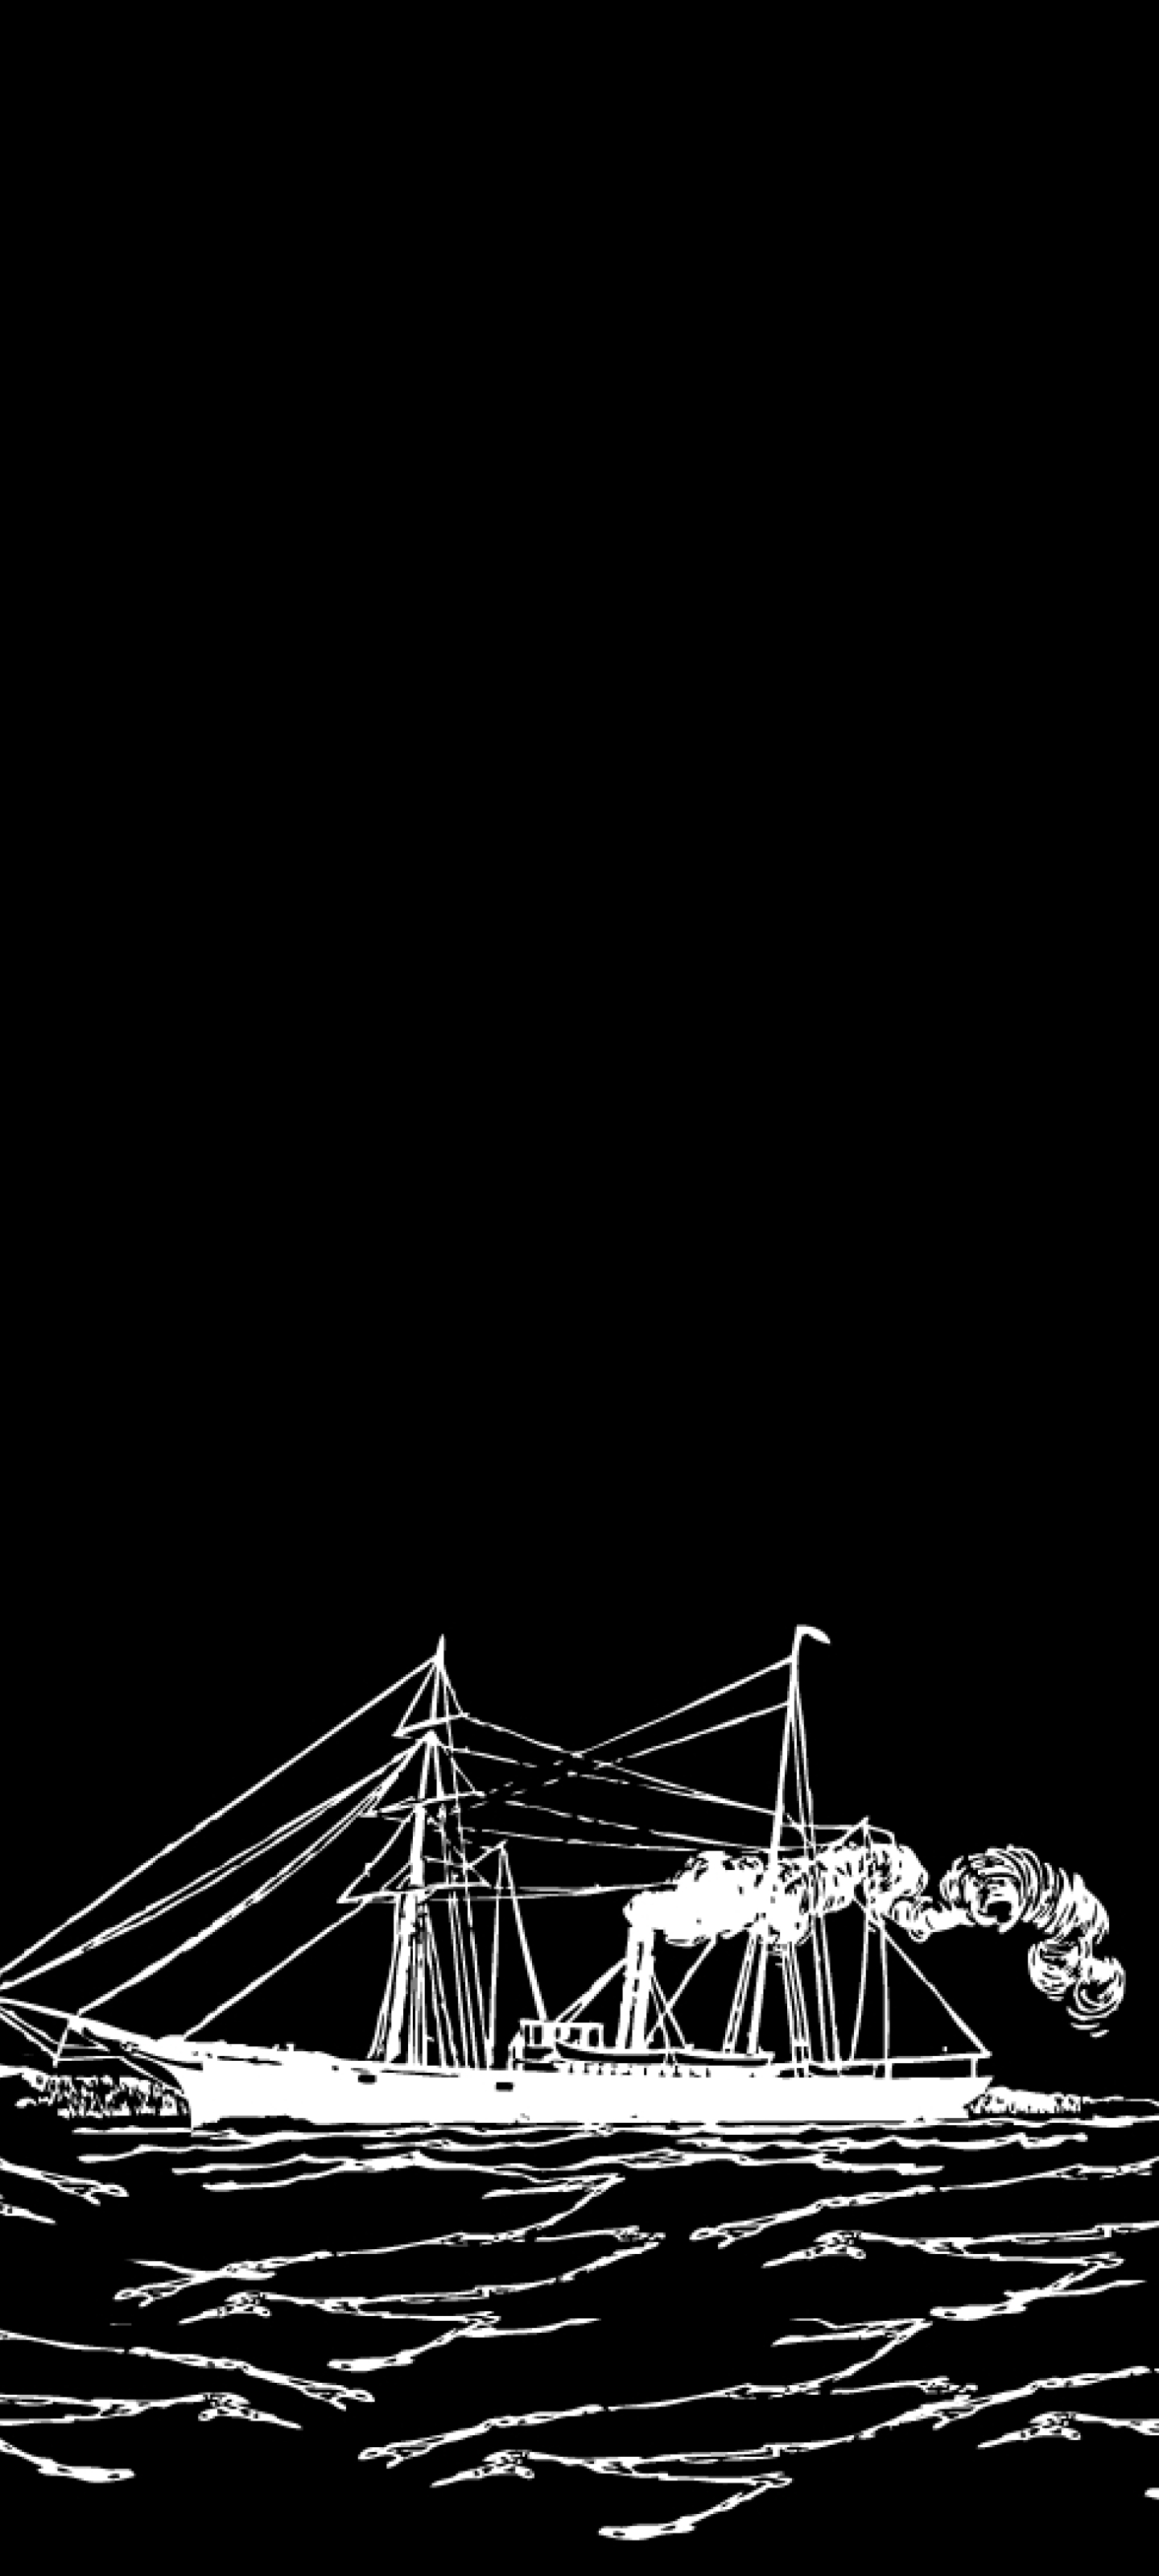 1440x3200 The Shore By The Night Minimal 1440x3200 Resolution Wallpaper